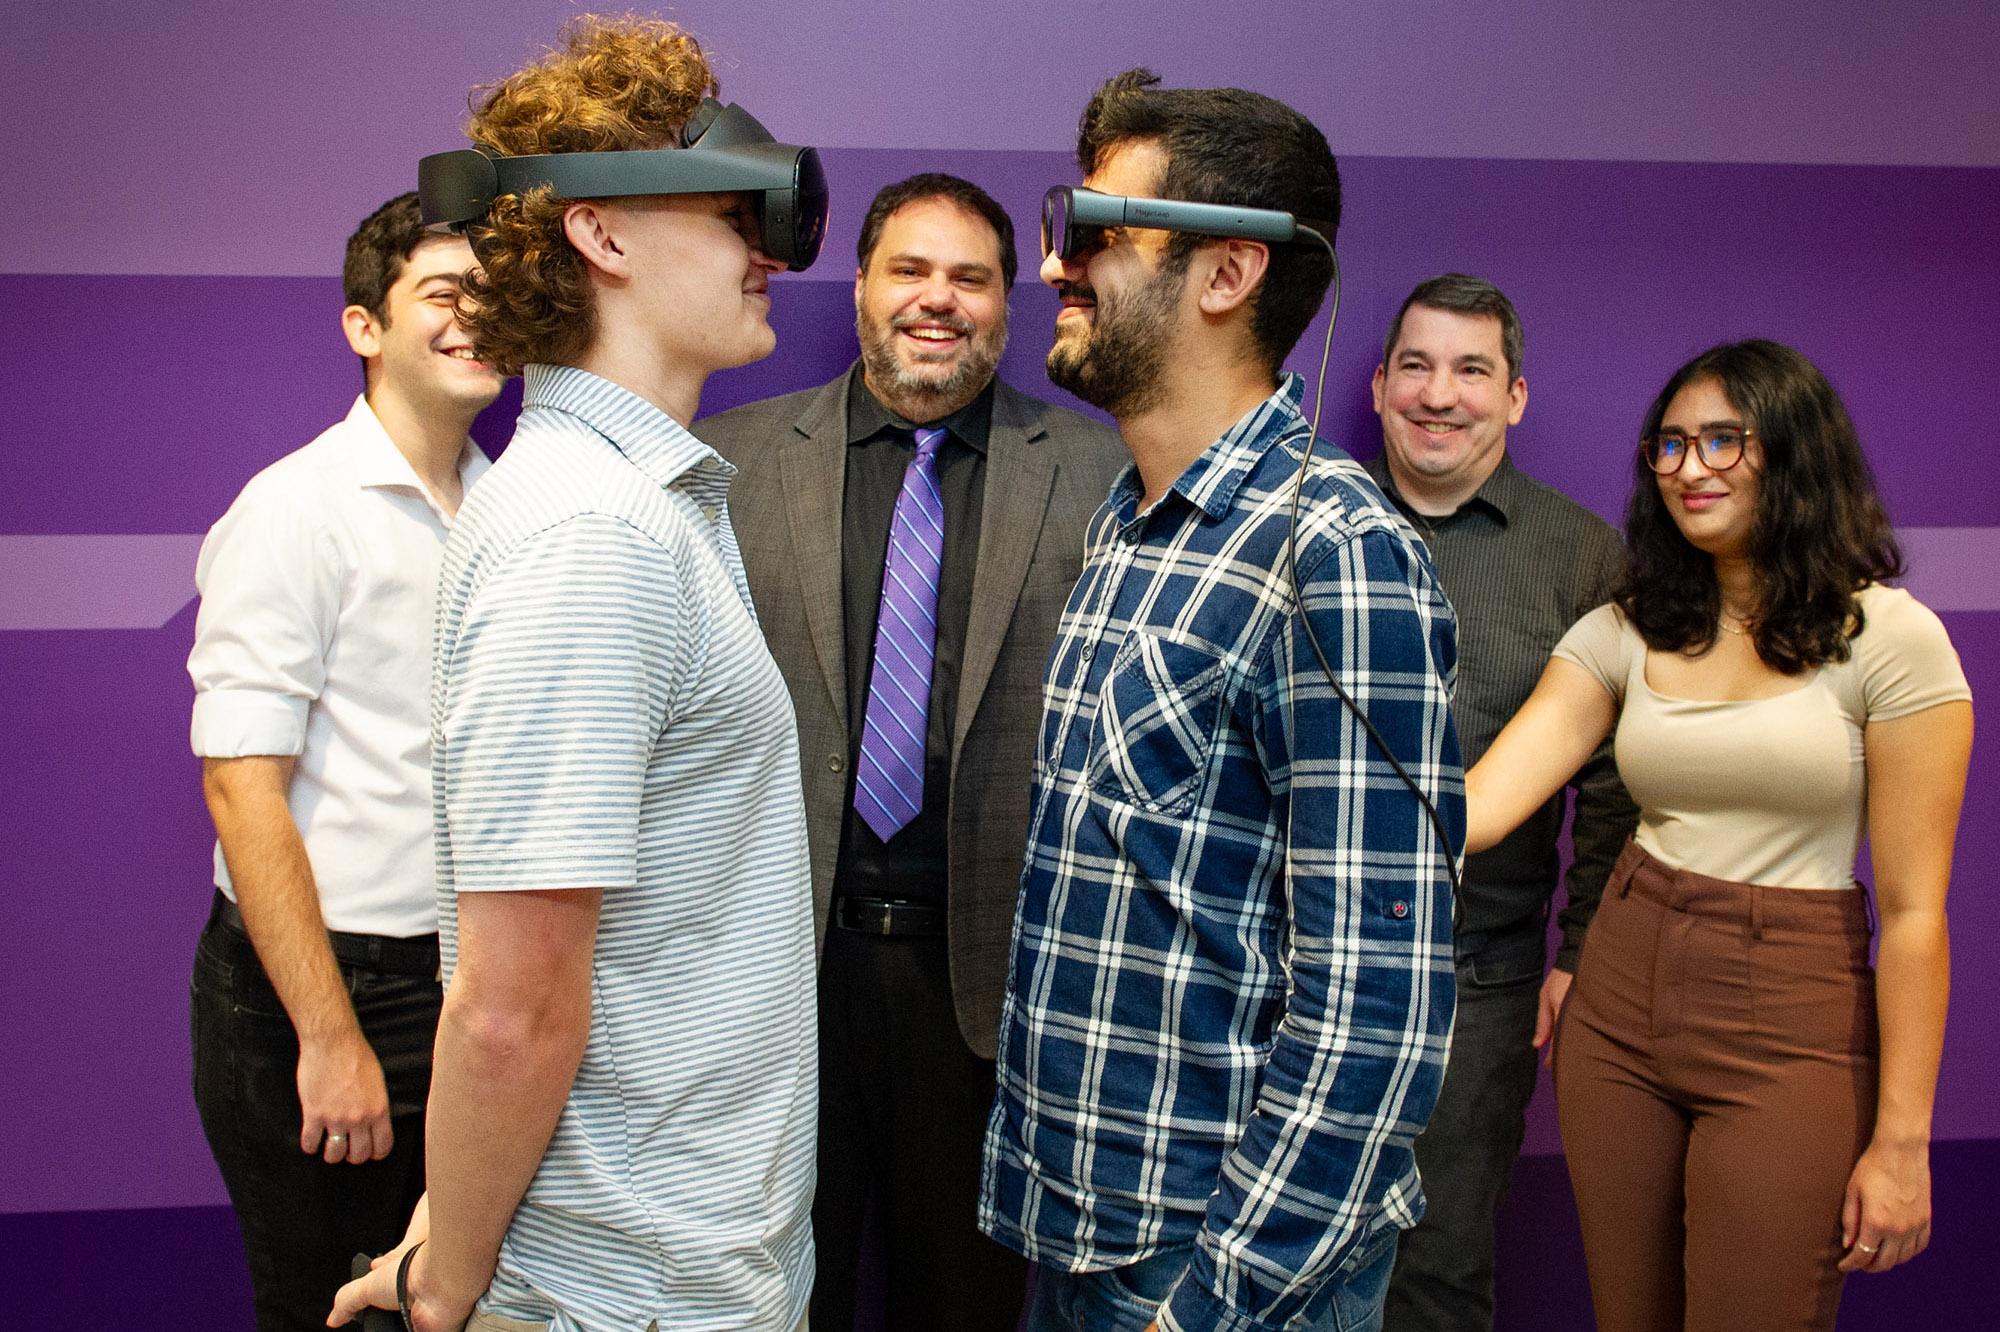 LSU researchers observe students participating in an AR/VR research exercise.